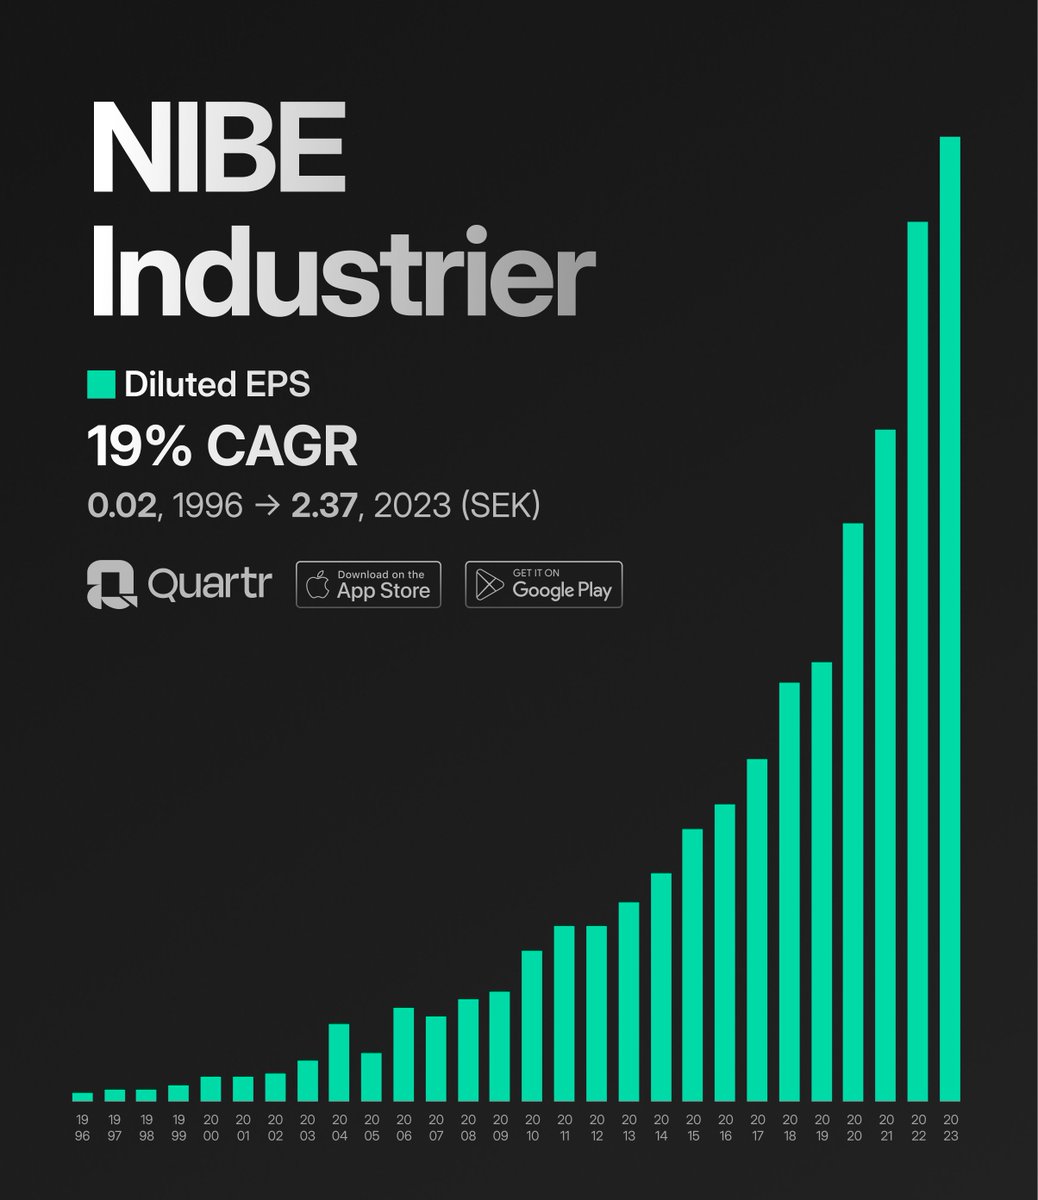 You don't have to chase the 'next big thing' to achieve great returns.

Let's look at 10 hidden industrial compounders with impressive track records 👇

1. $NIBE is a leading heating solutions manufacturer and probably one of the most impressive companies you've never heard of: